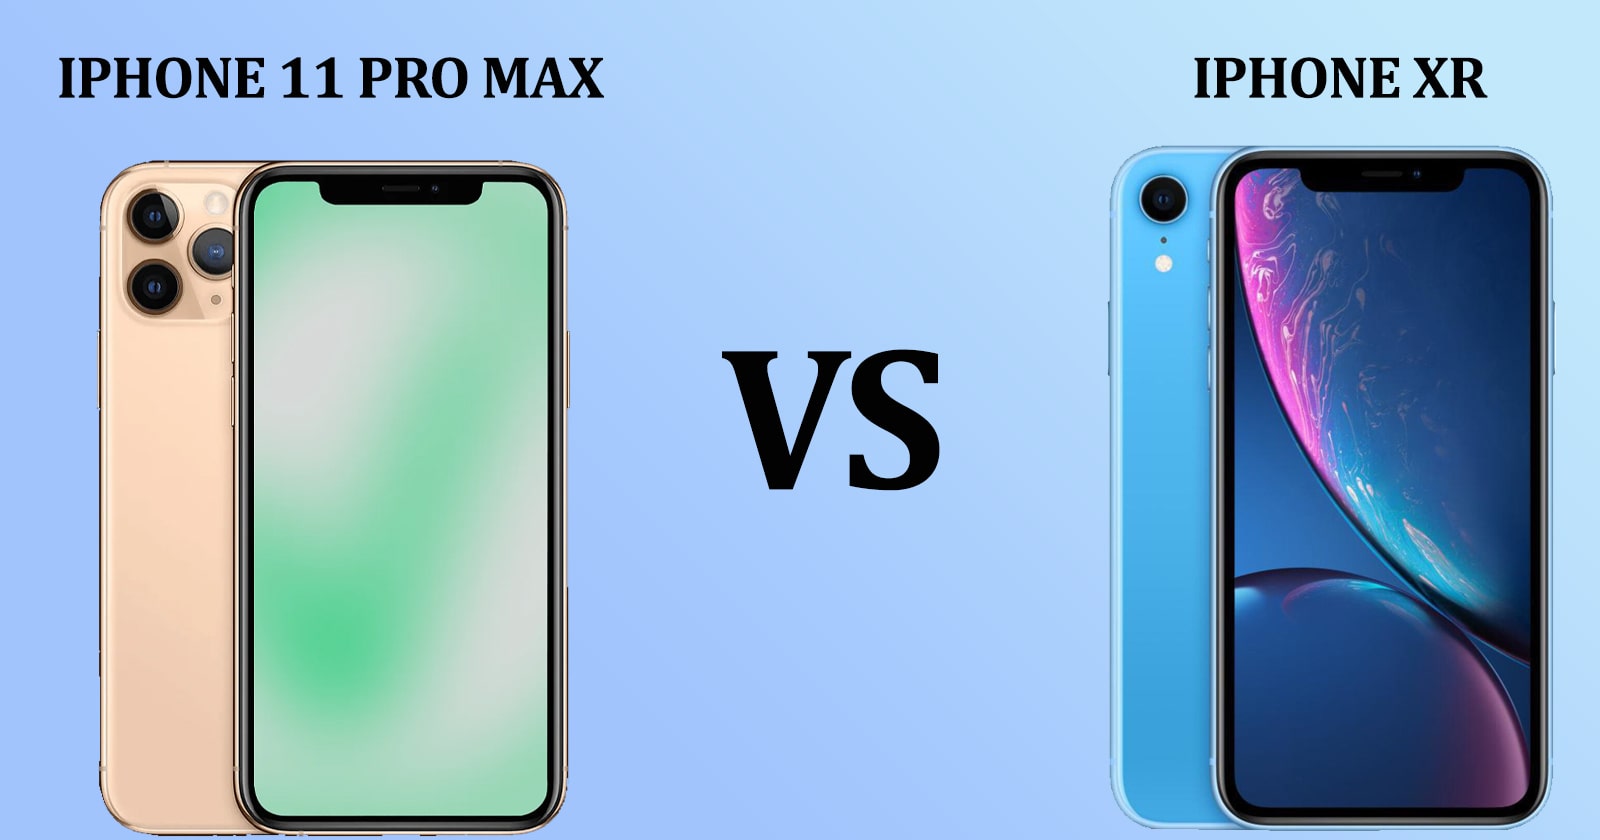 What Is the Difference Between iPhone XR and 11 Pro Max